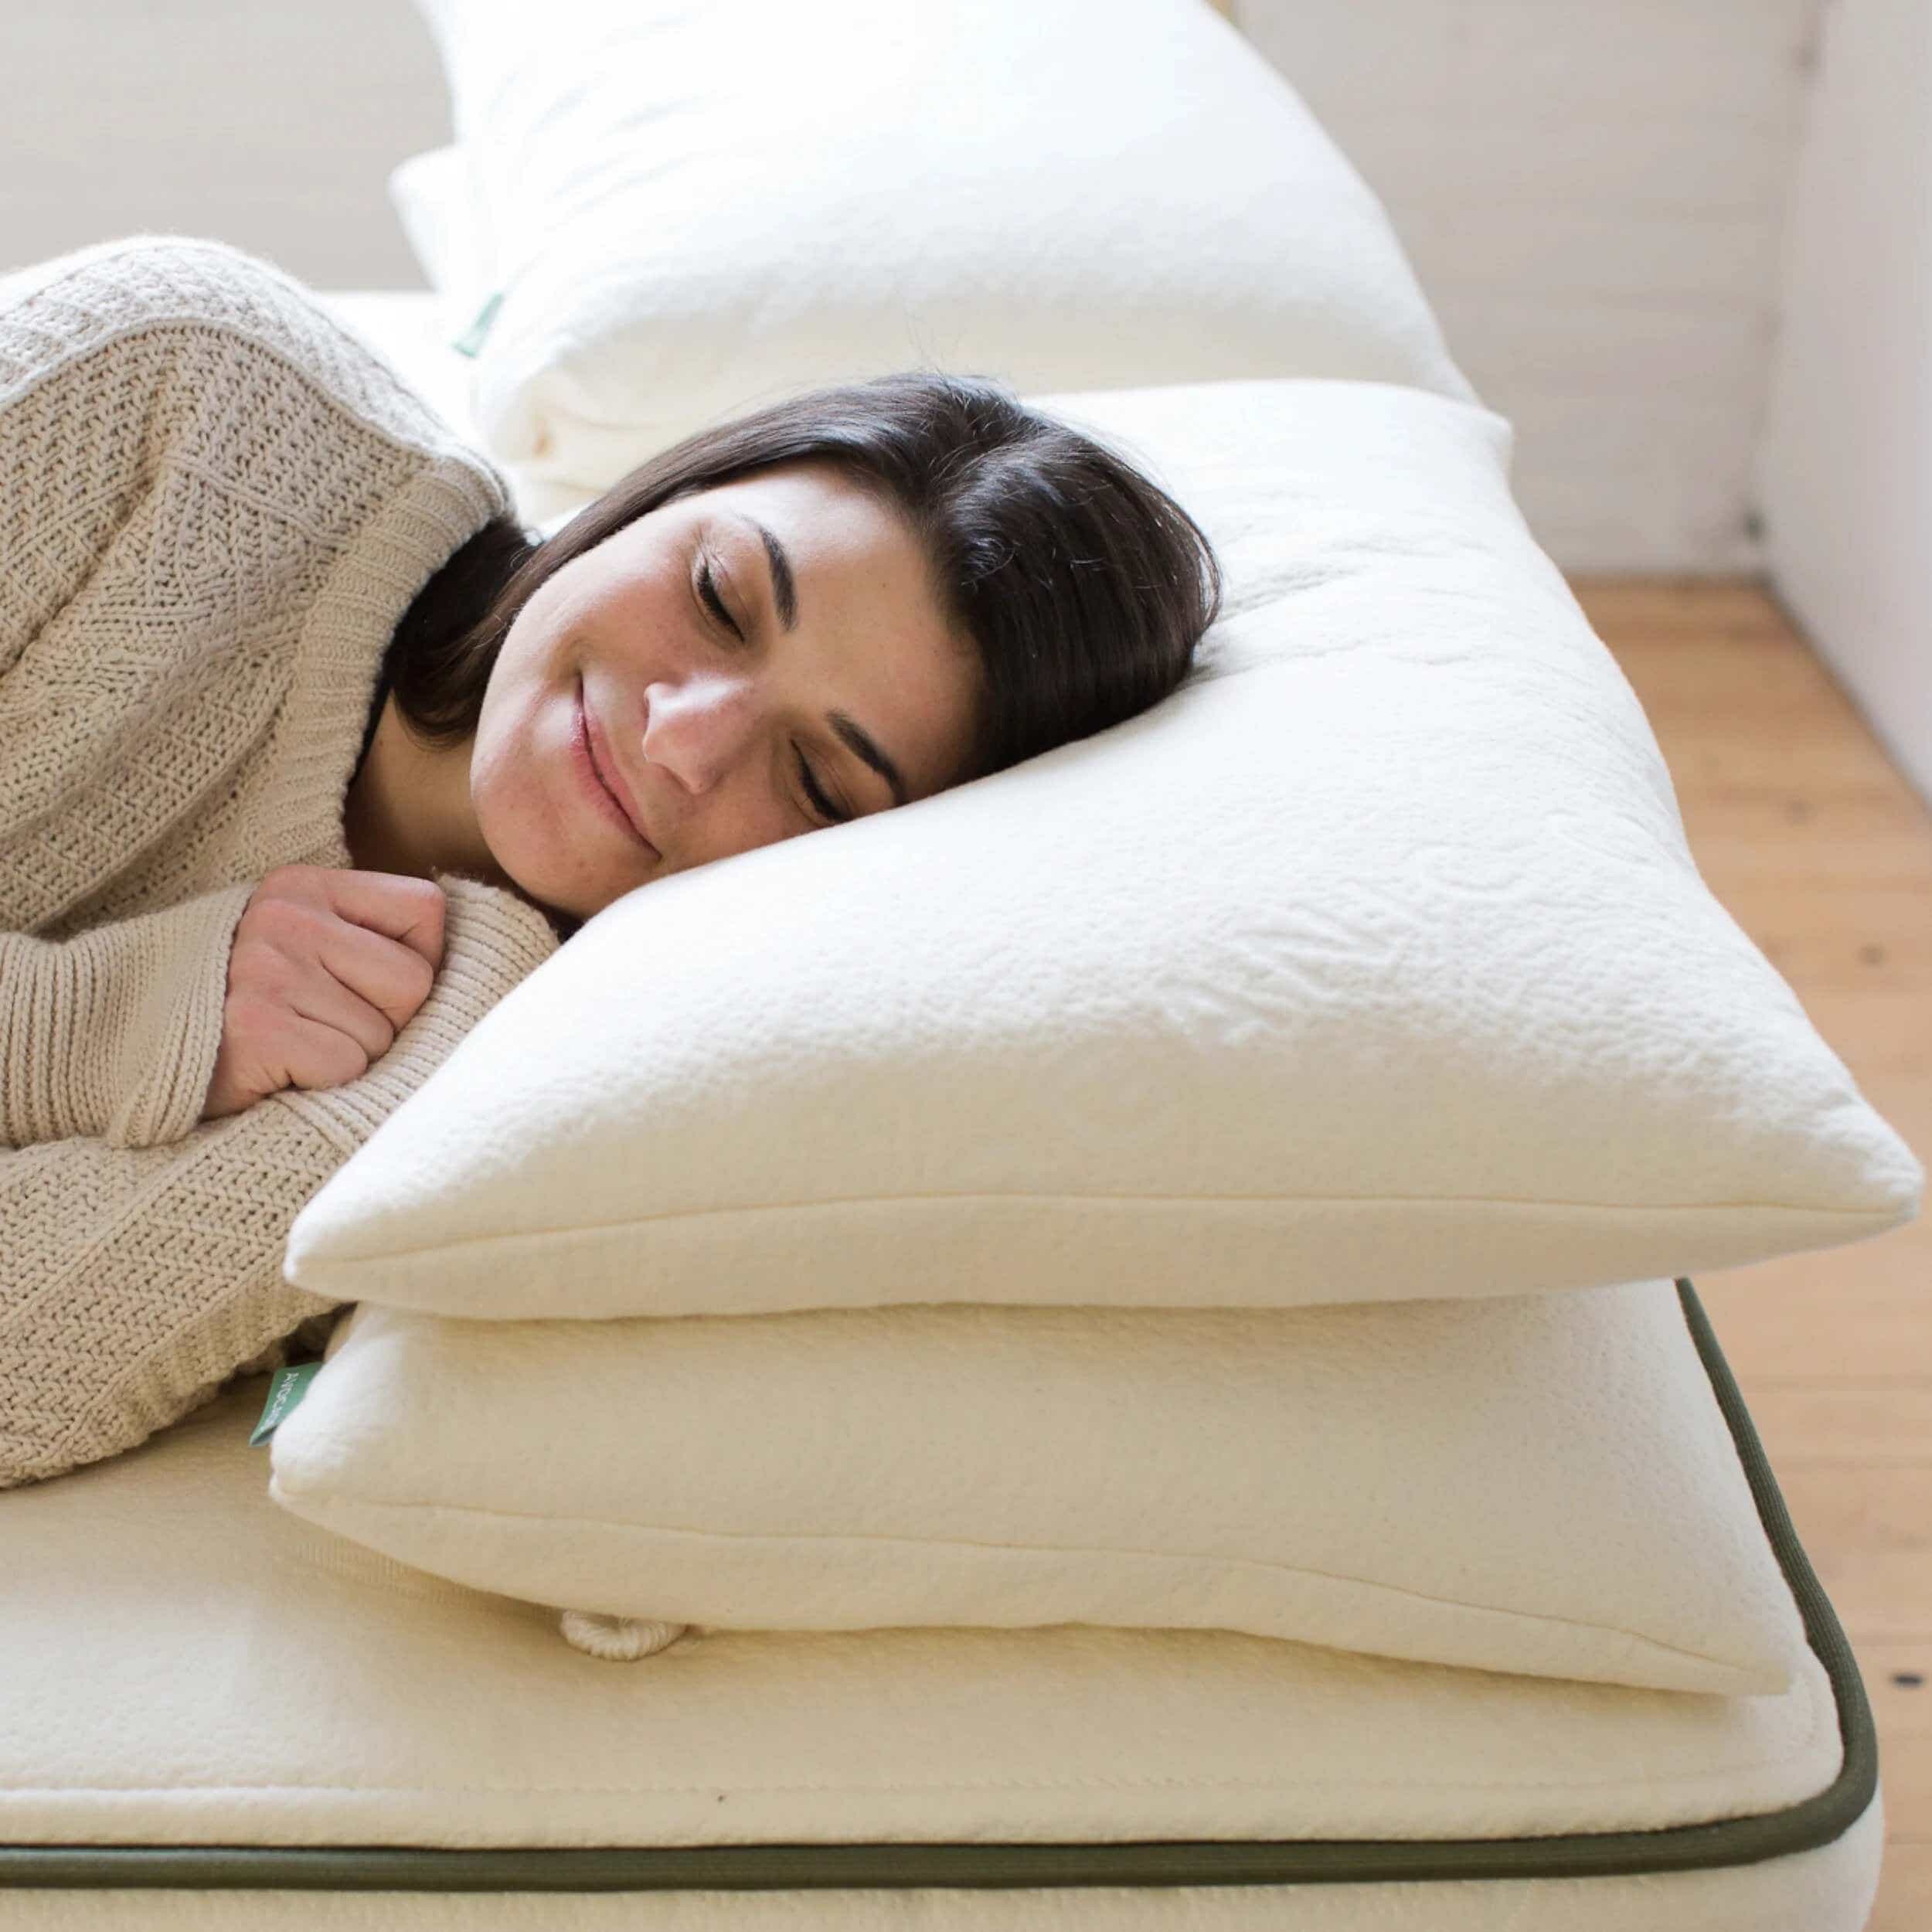 5 Best BBL Pillow Reviews - The Must Have Selection For 2023 